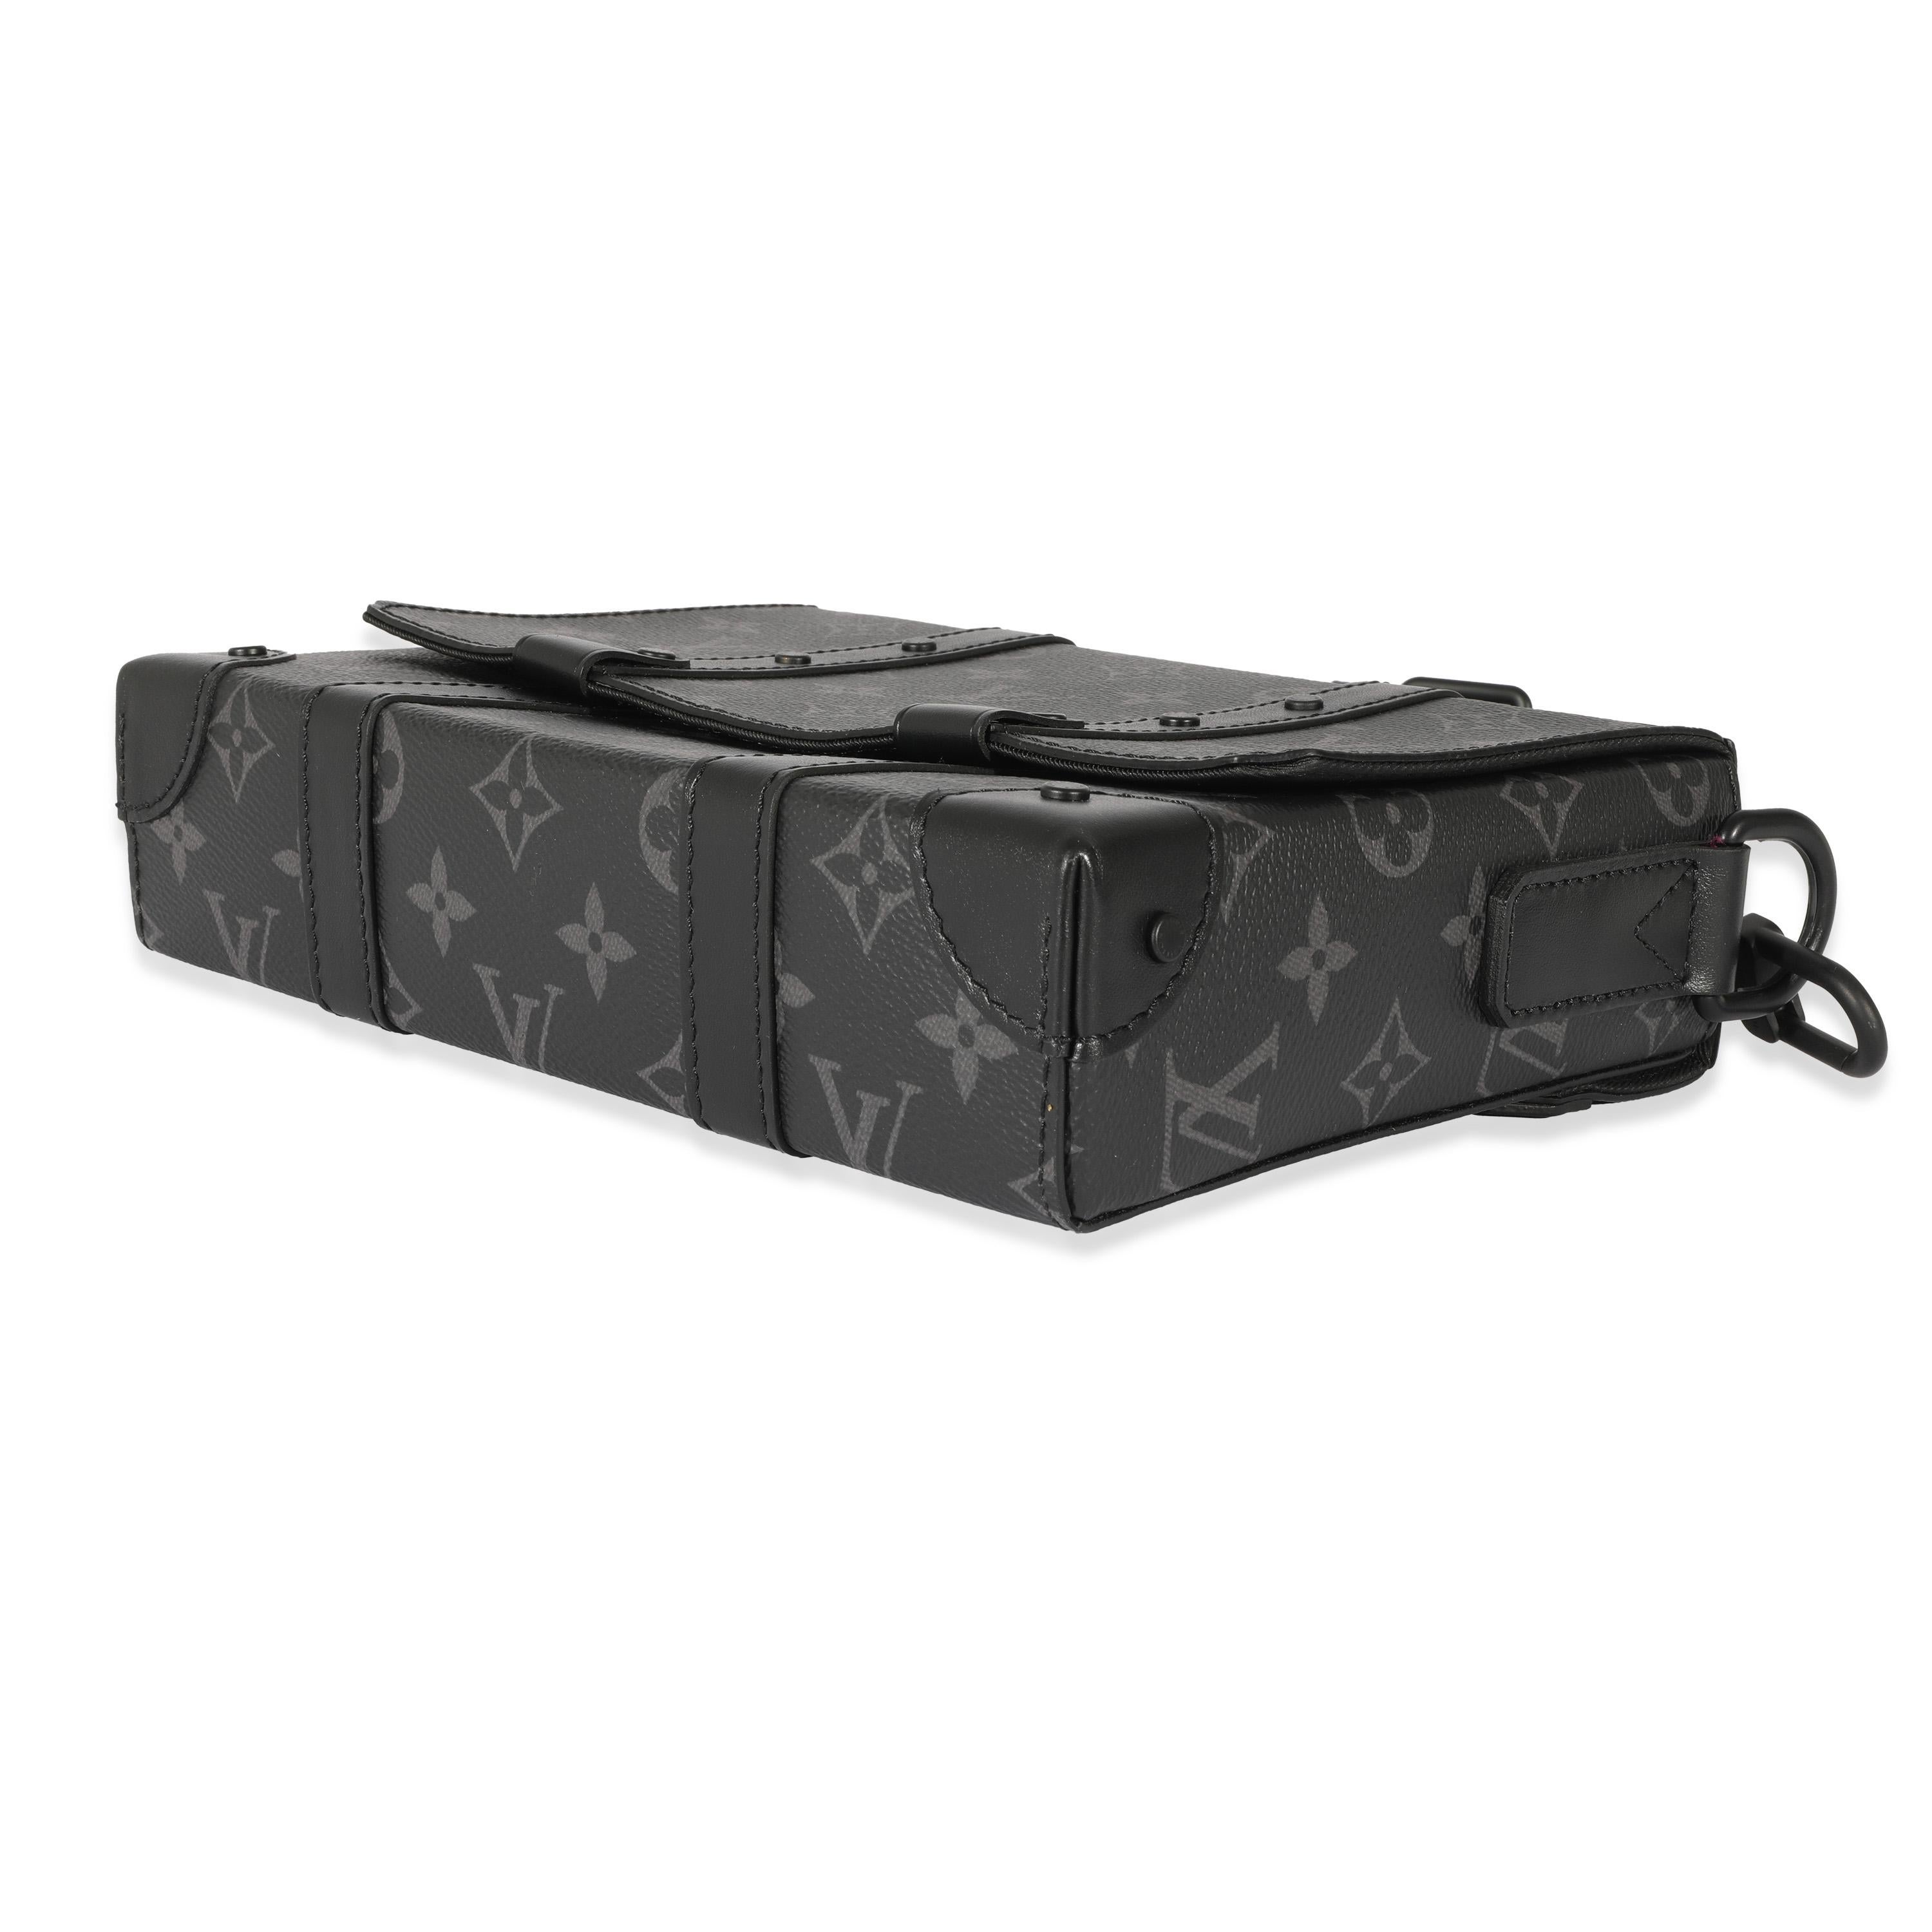 Louis Vuitton Monogram Eclipse Trunk Messenger In Excellent Condition For Sale In New York, NY